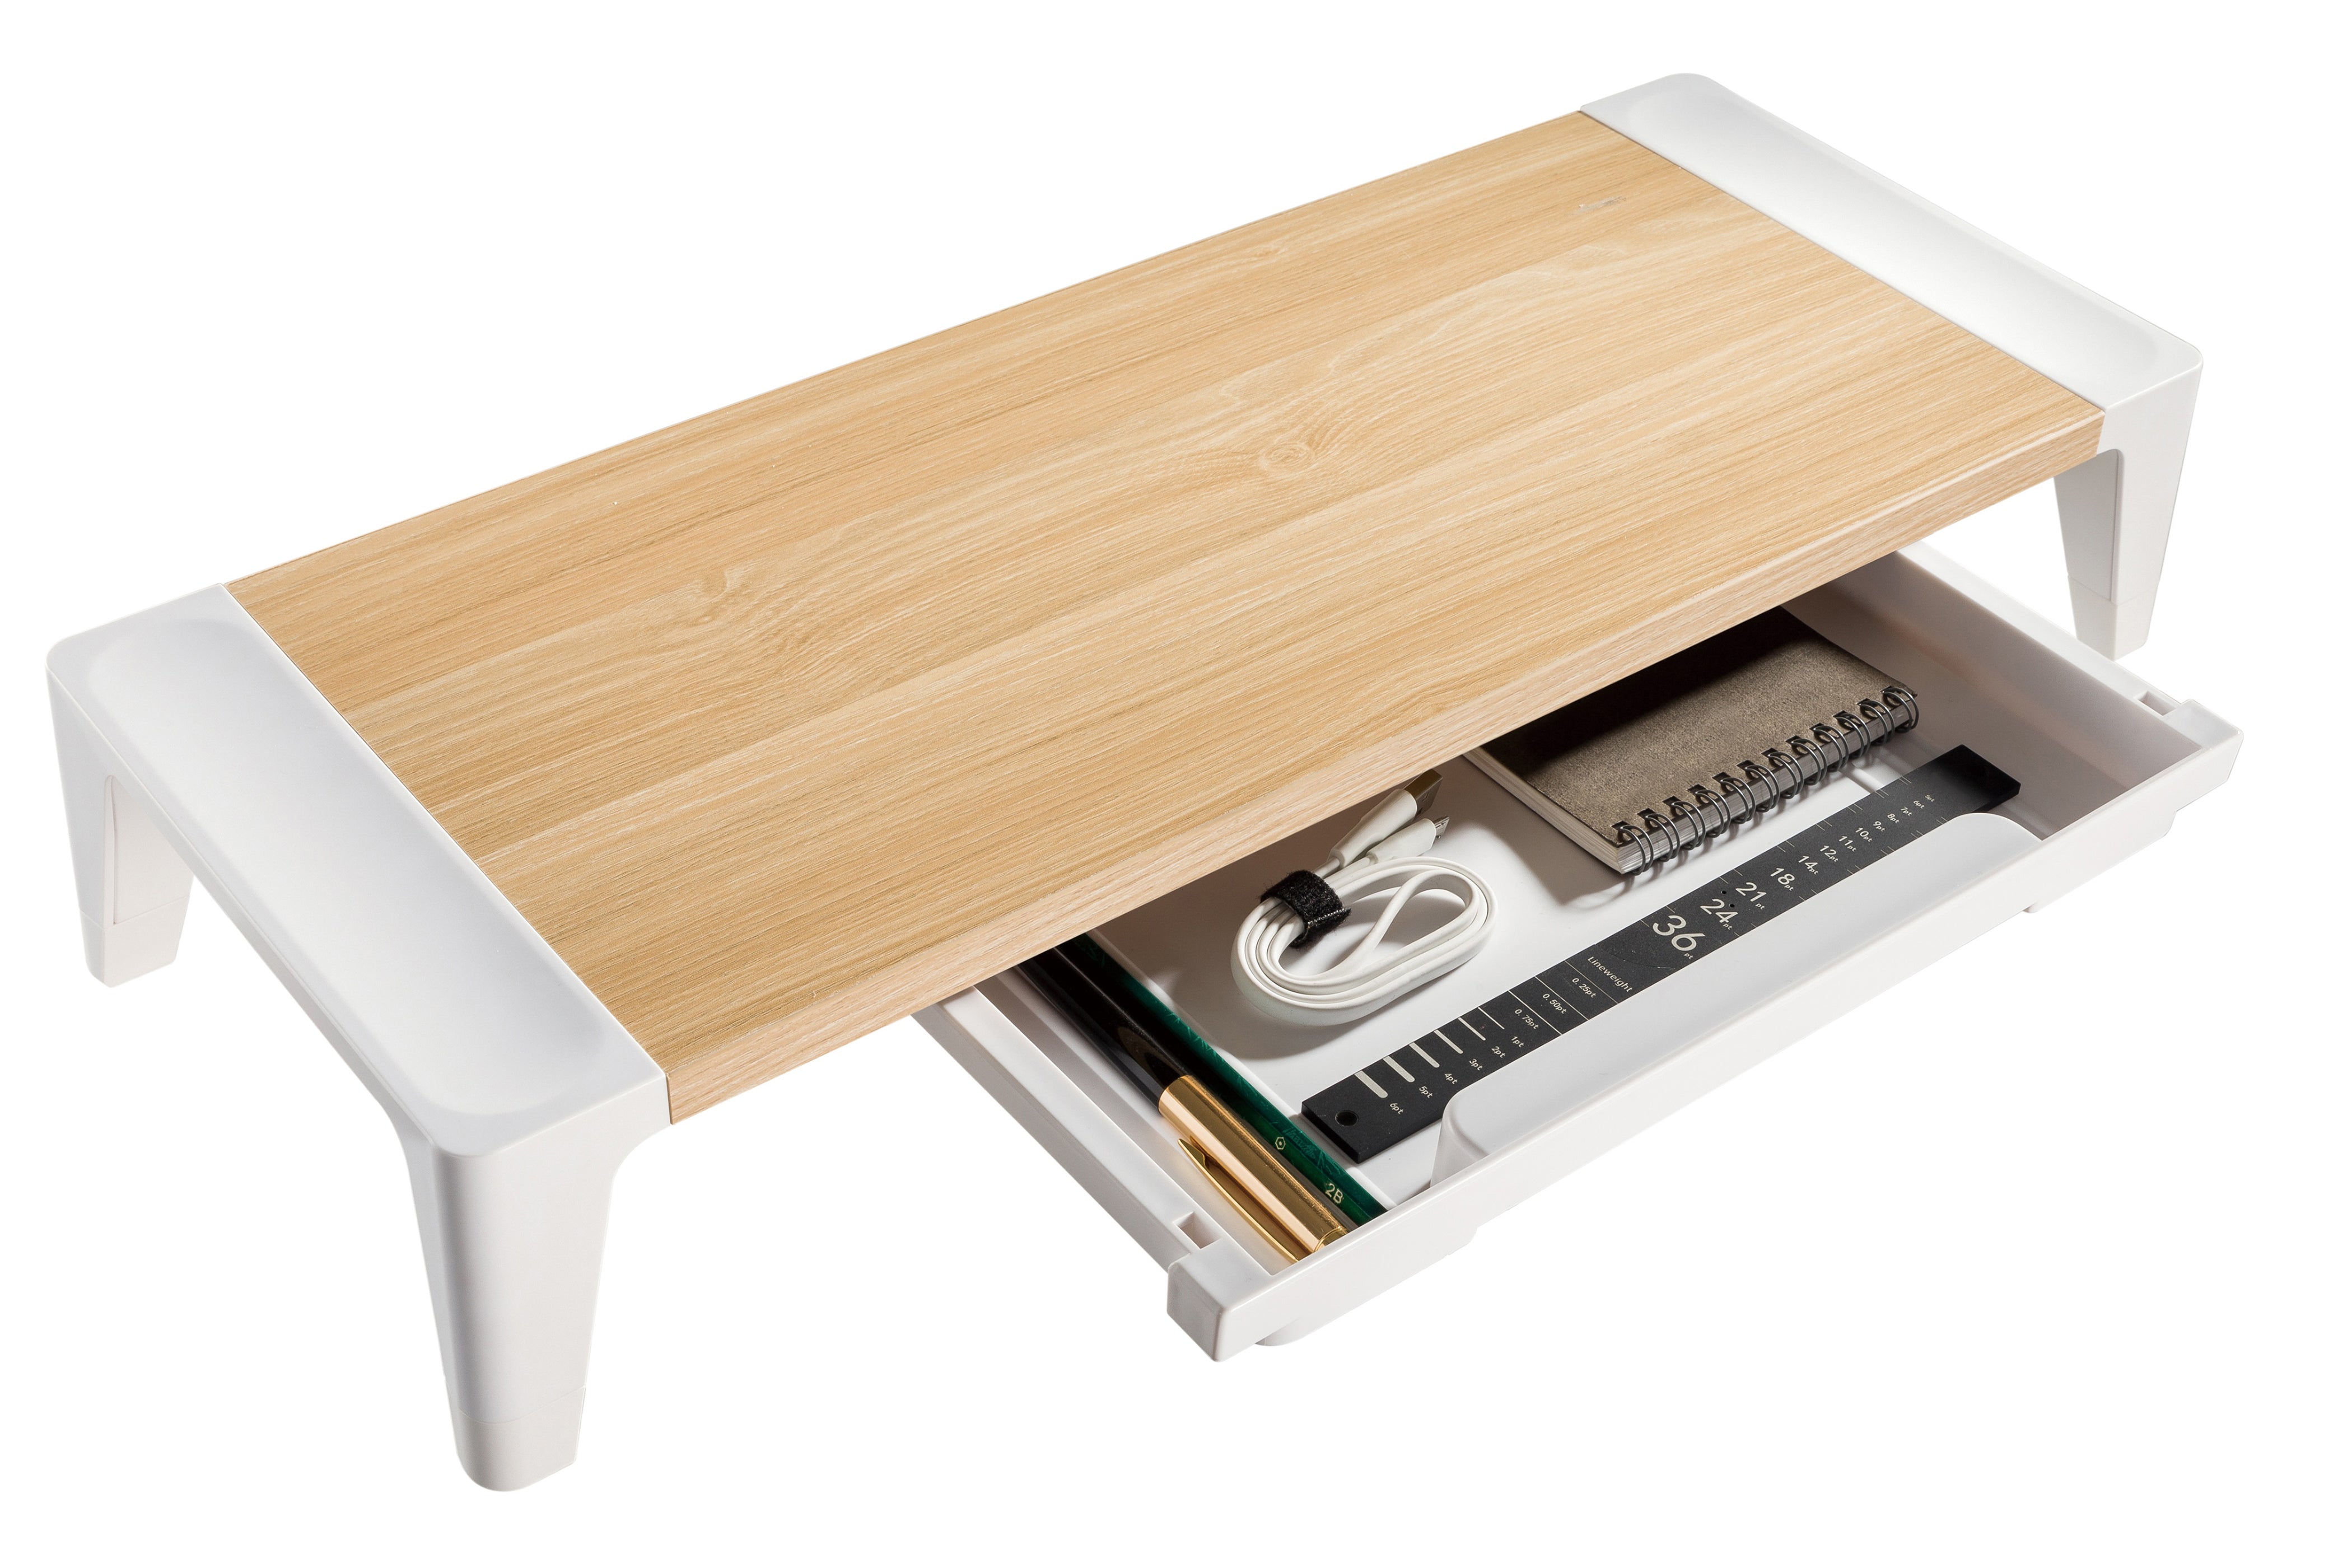 ProperAV Monitor Riser Stand with Height Adjustable with Drawer - Wood Effect